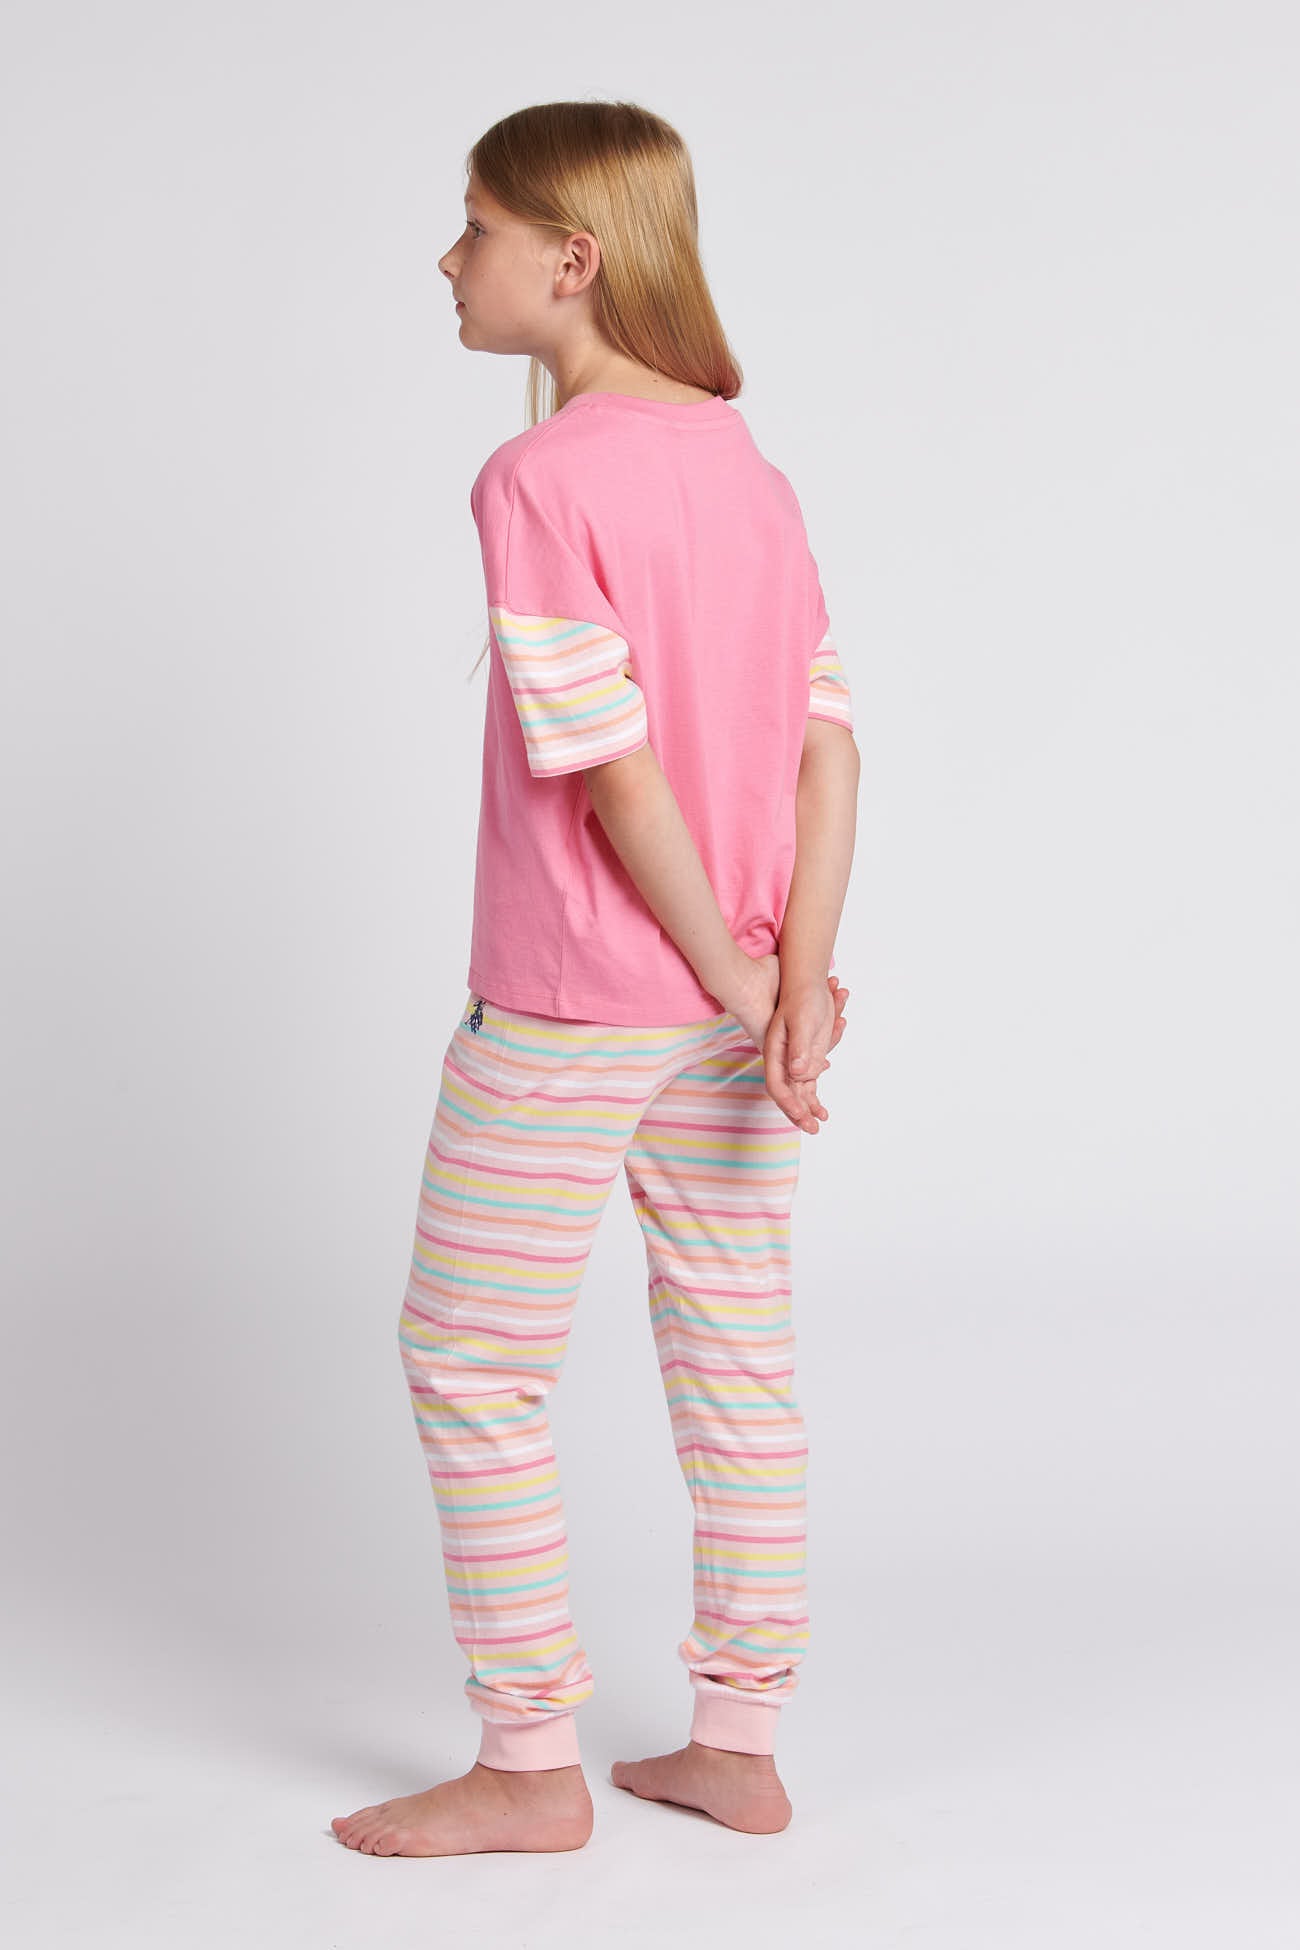 Girls Tee And Stripe Legging Lounge Set in Orchid Pink